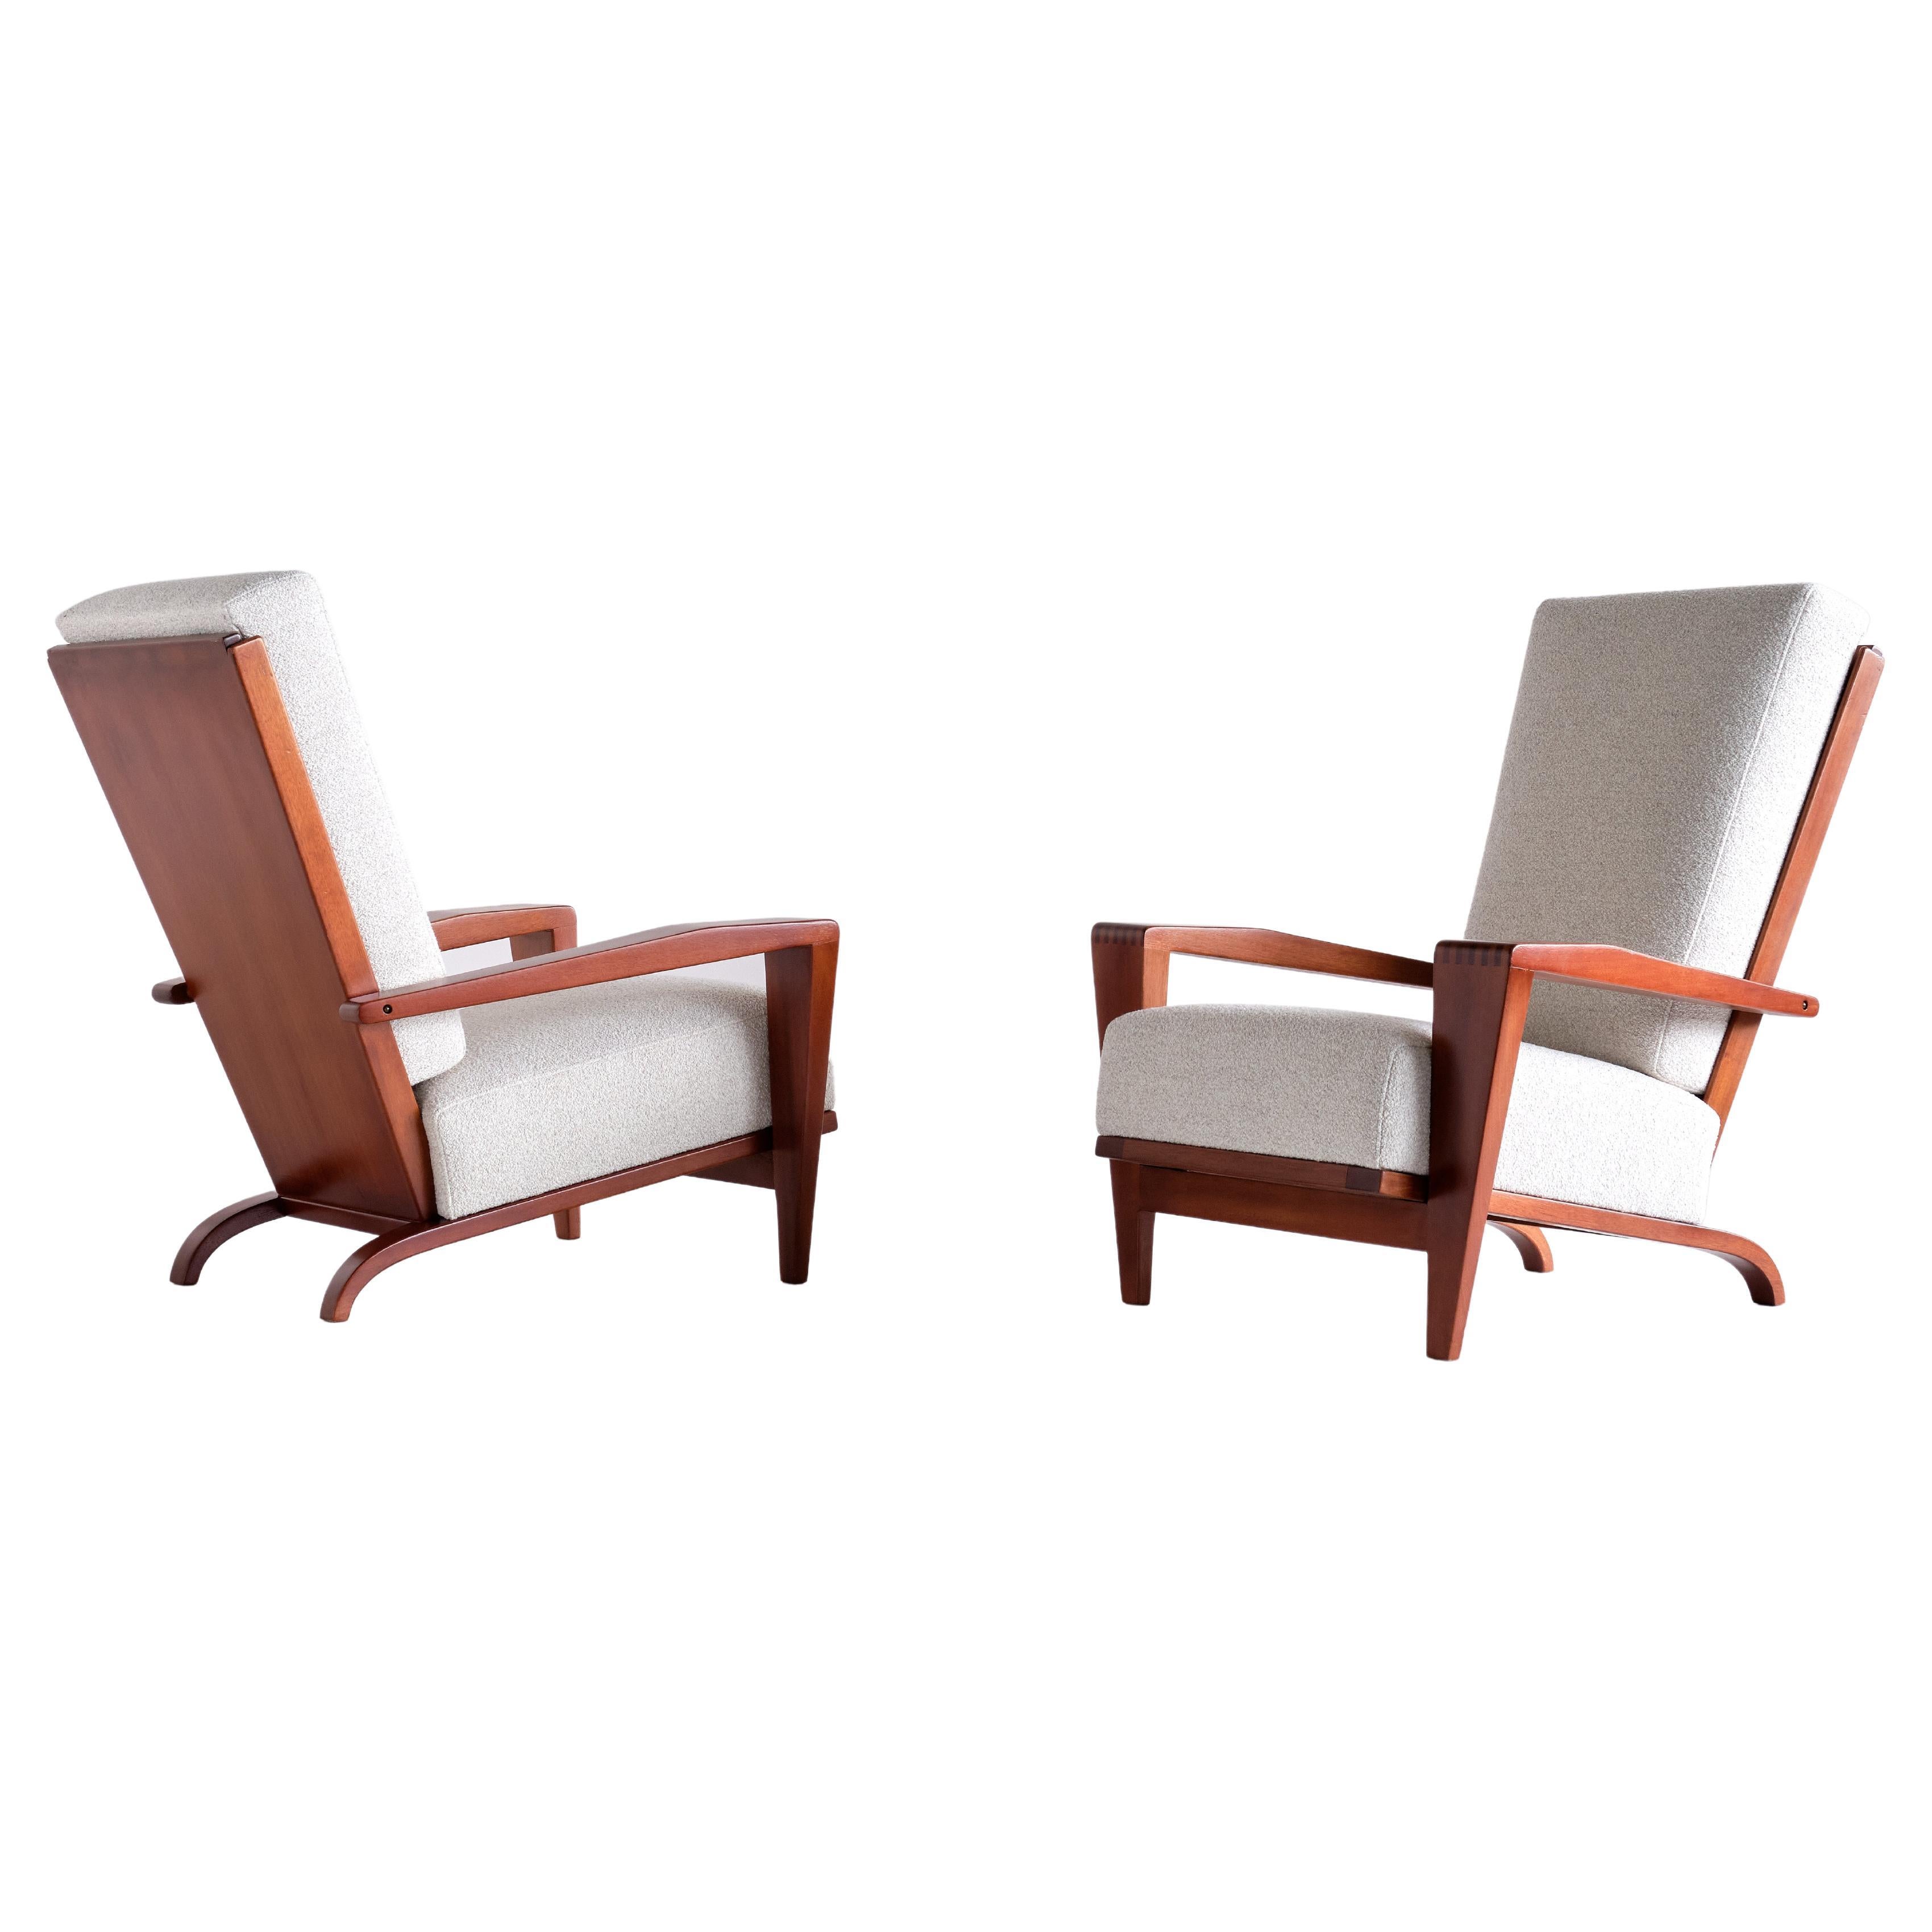 French Pair of André Sornay Armchairs in Sapele Mahogany and Bouclé, France, 1950s For Sale